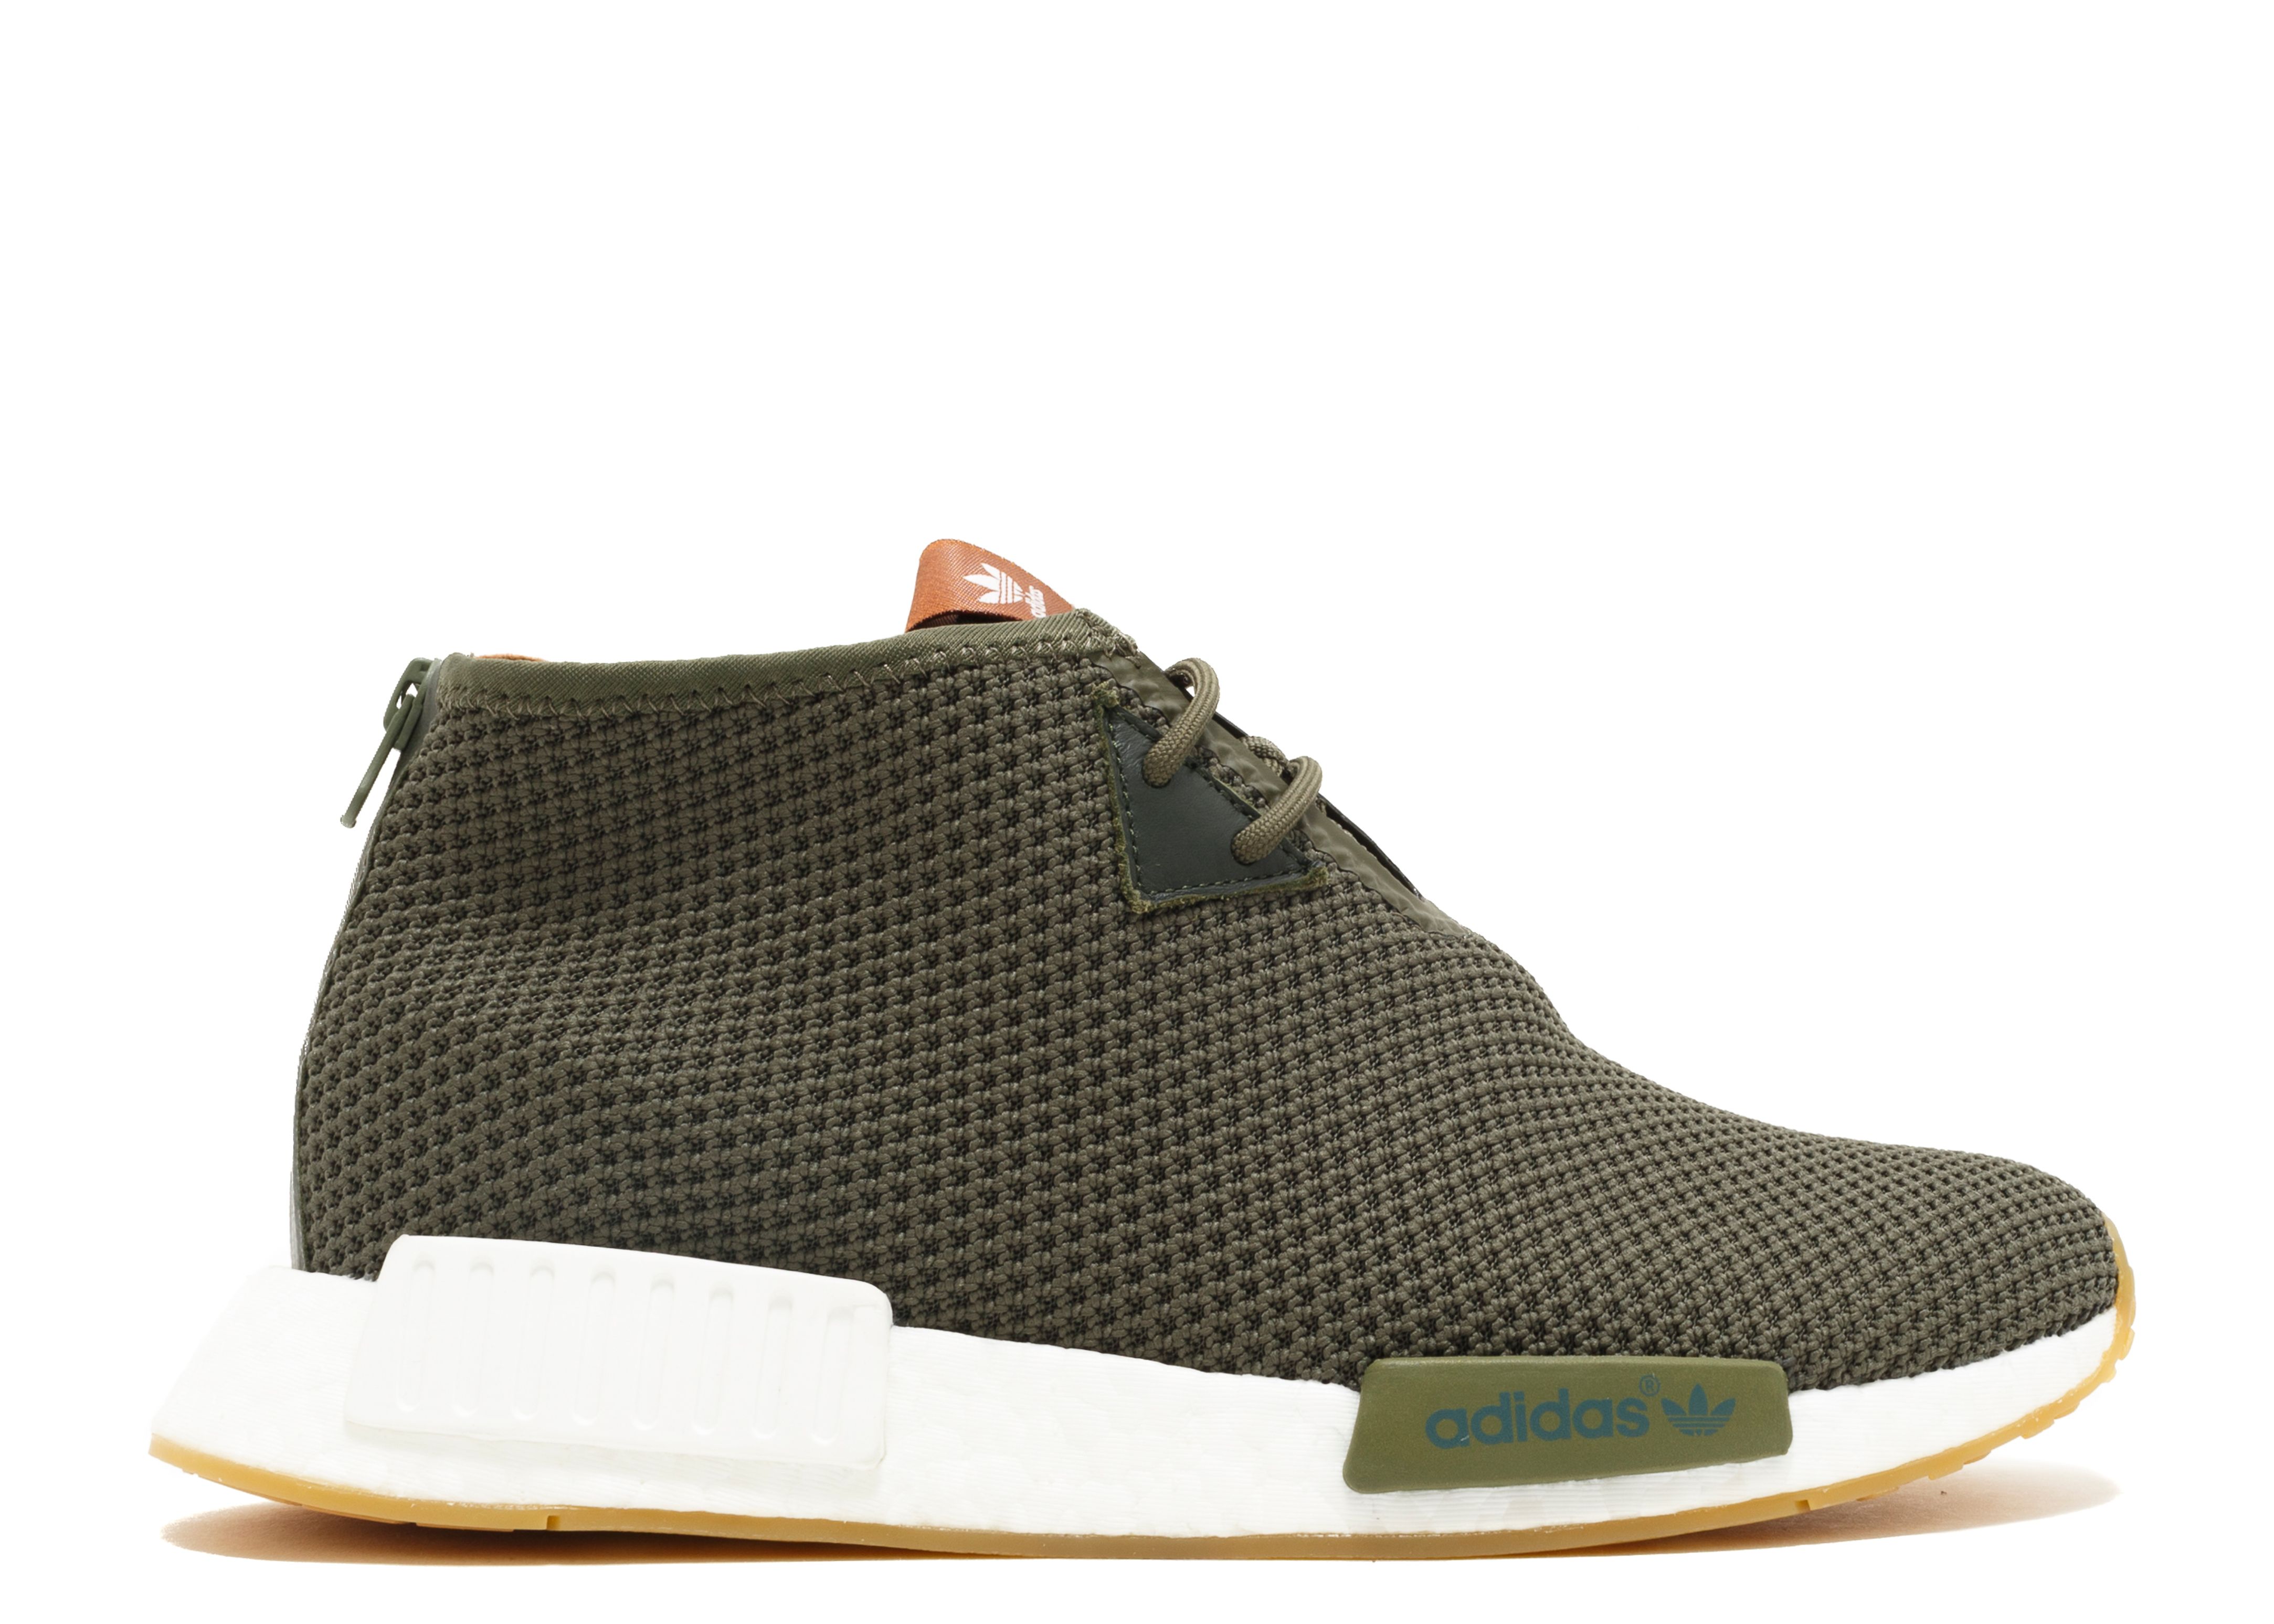 END. NMD_C1 'END' - Adidas - BB5993 - olive/white/gum |